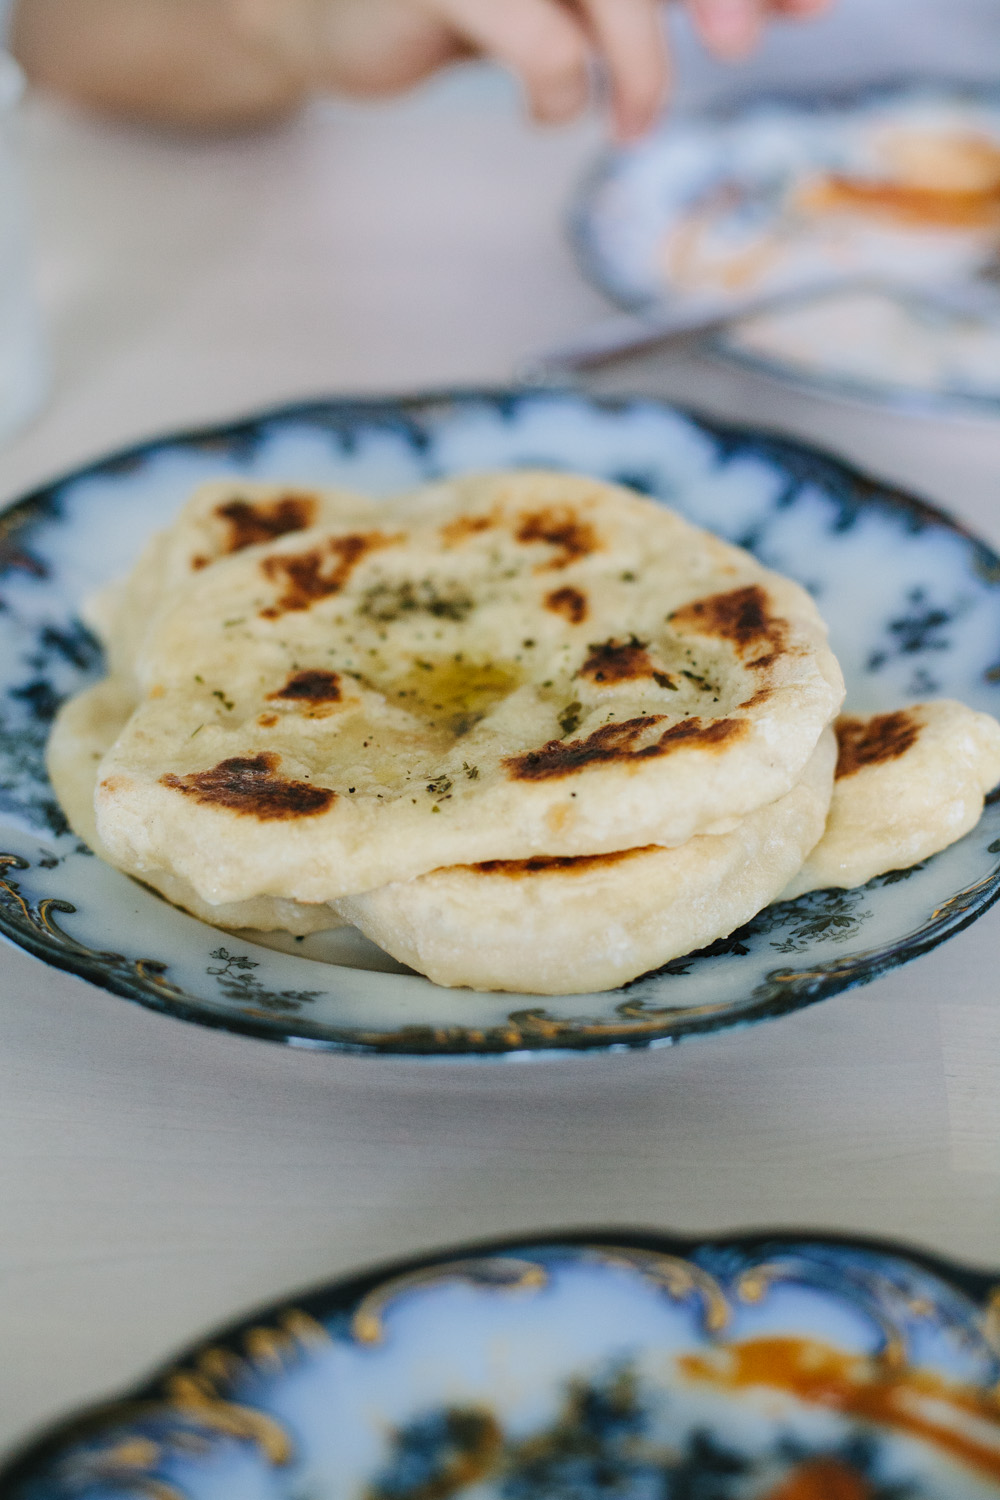 sourdough naan made from discard